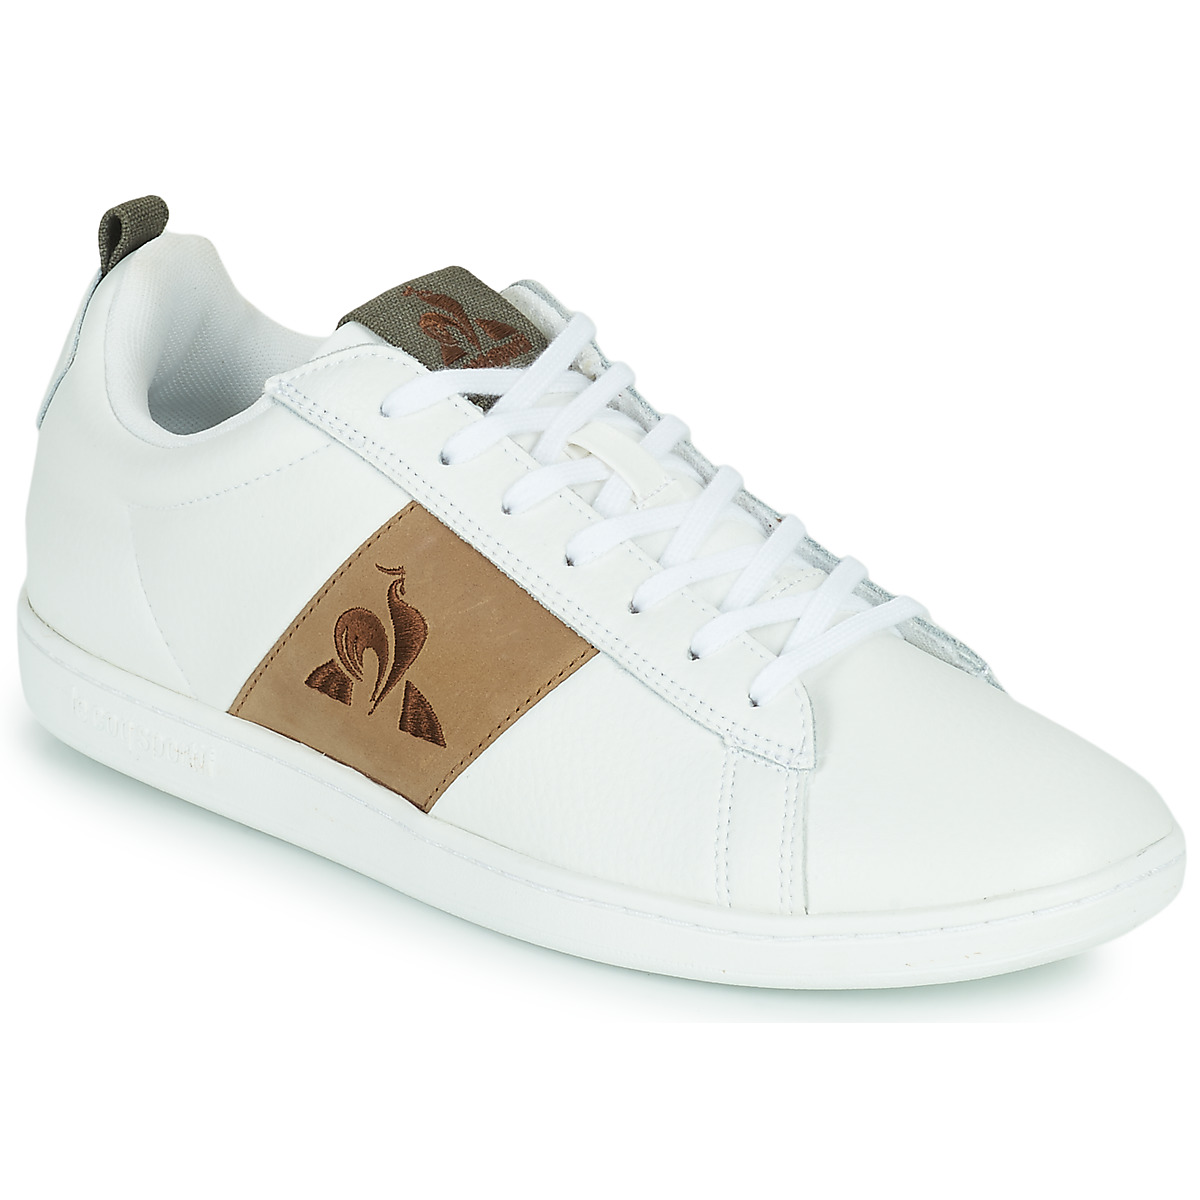 Chaussures Homme Baskets basses Le Coq Sportif COURTCLASSIC WORKWEAR LEATHER Blanc / Marron